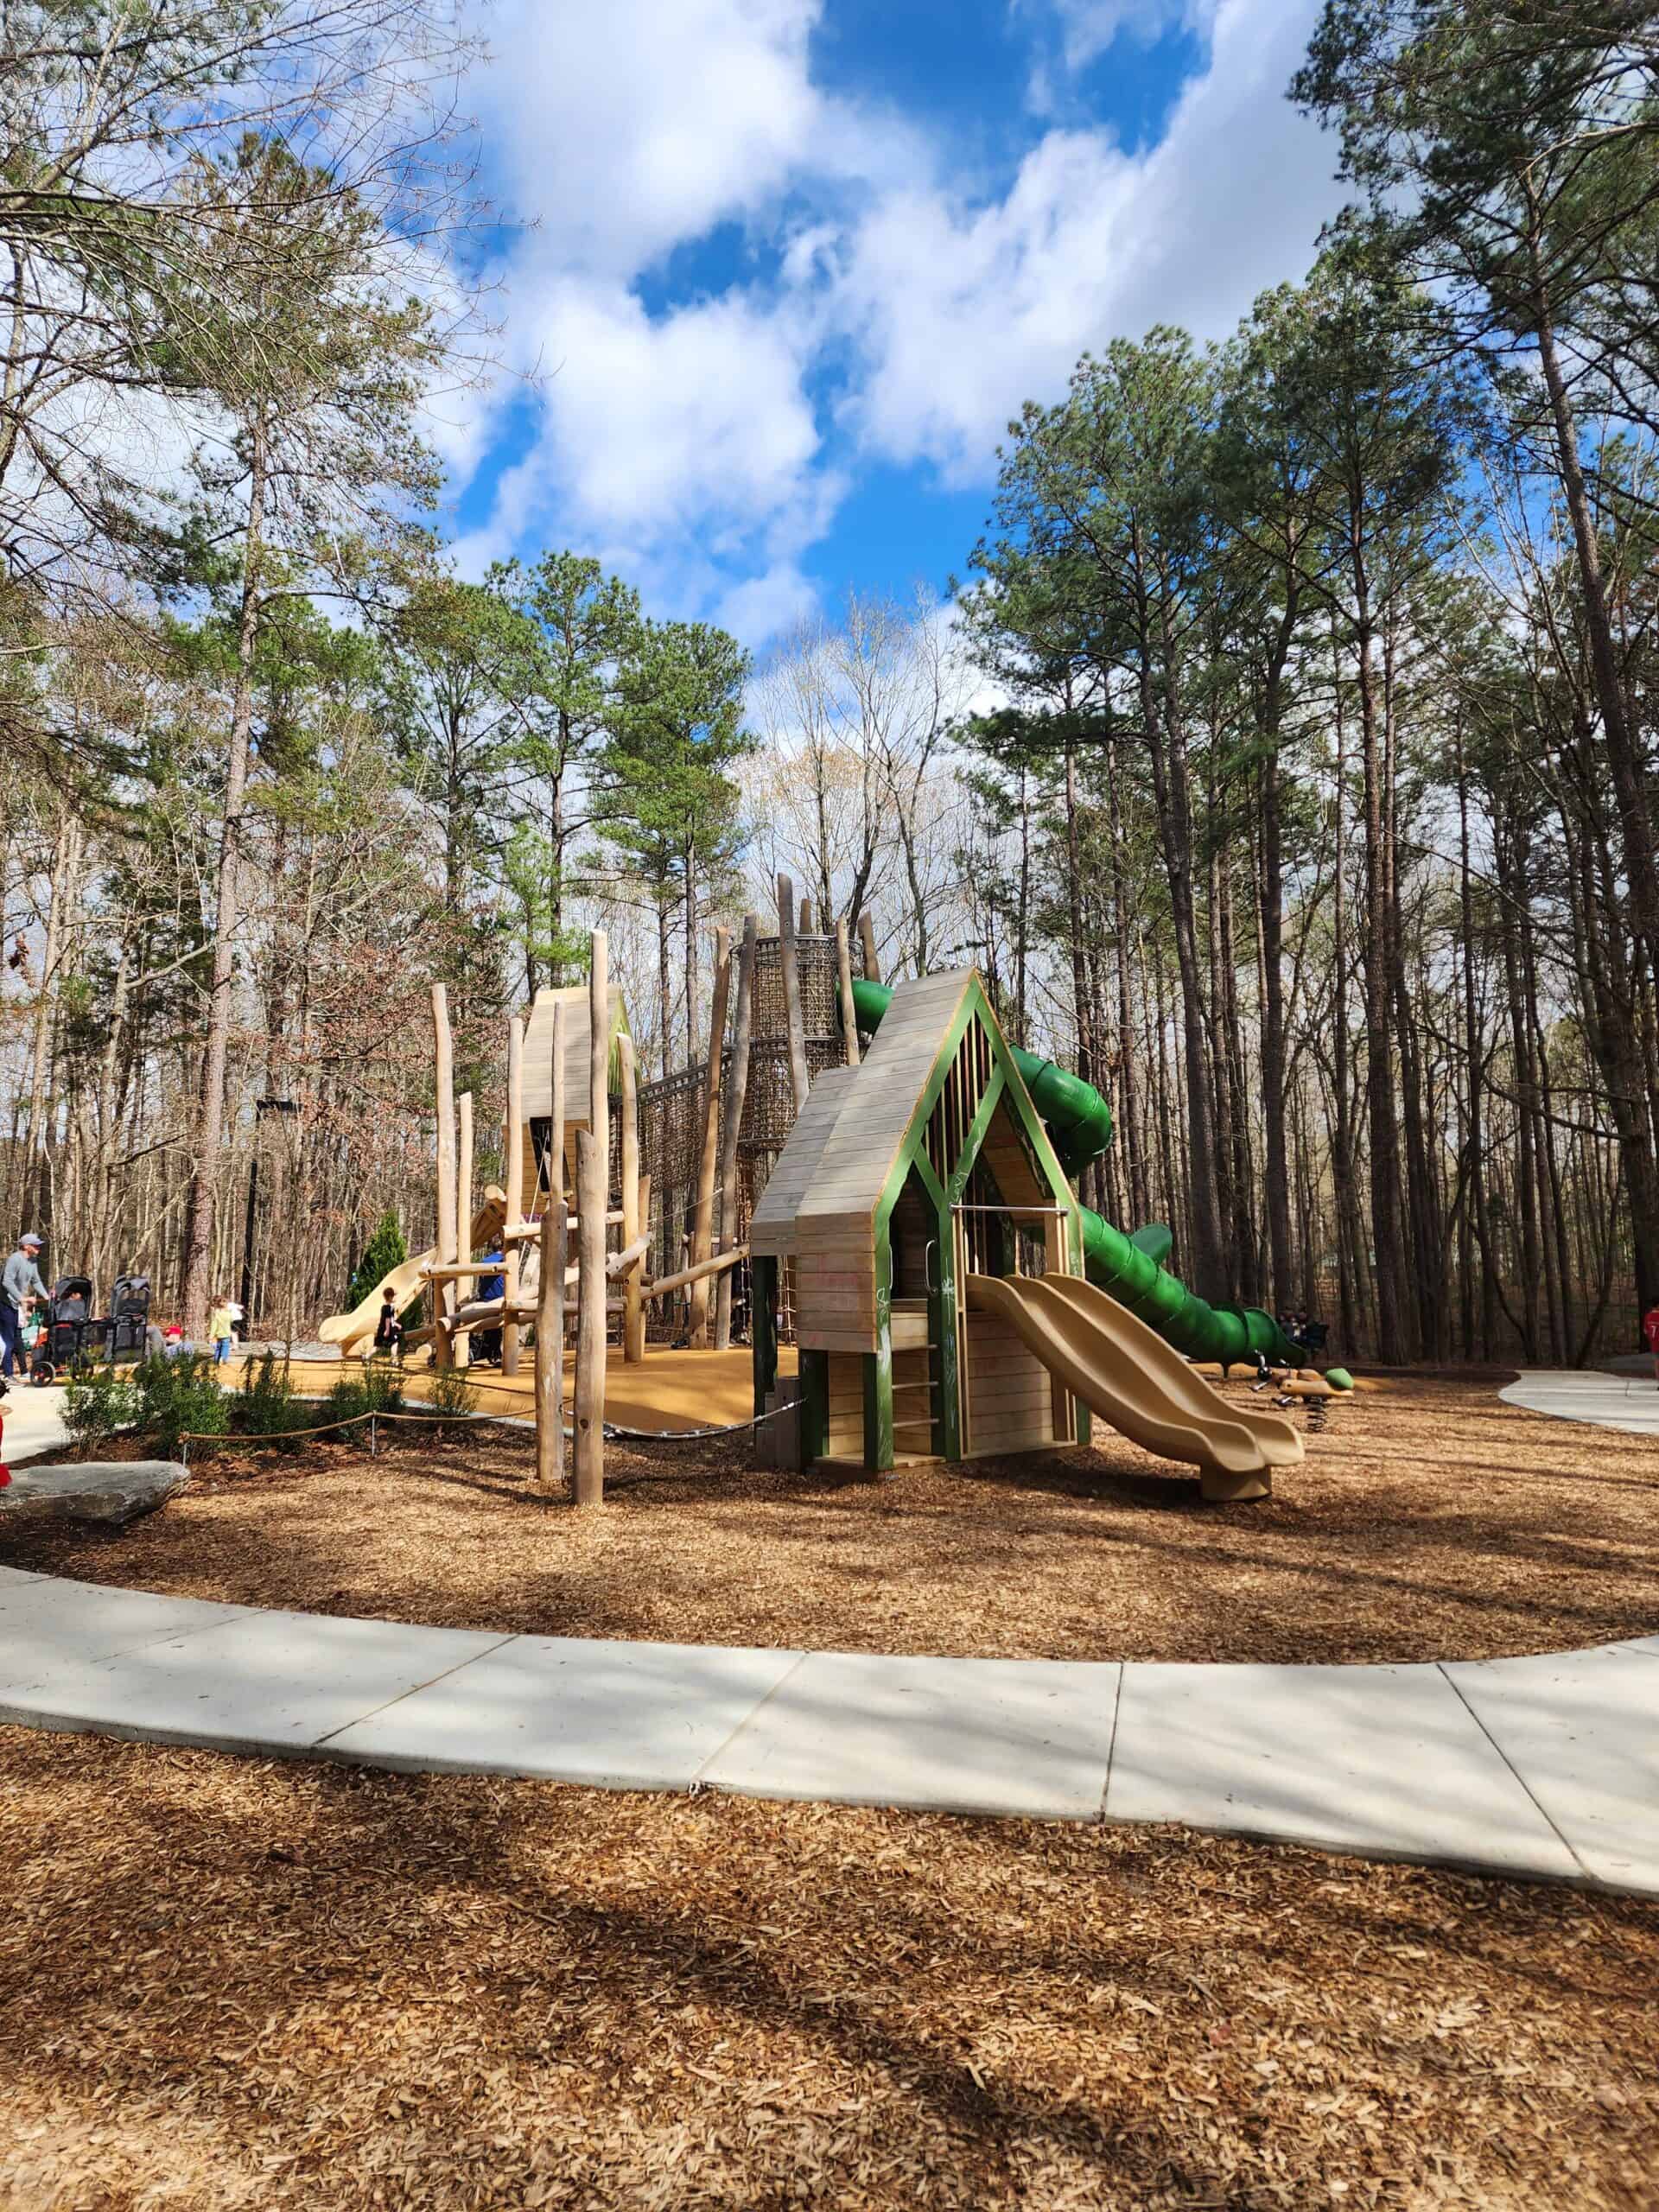 Children play on a natural wood and green plastic playground, featuring slides and climbing areas, nestled among tall pine trees with a clear blue sky overhead and a bed of wood chips underfoot